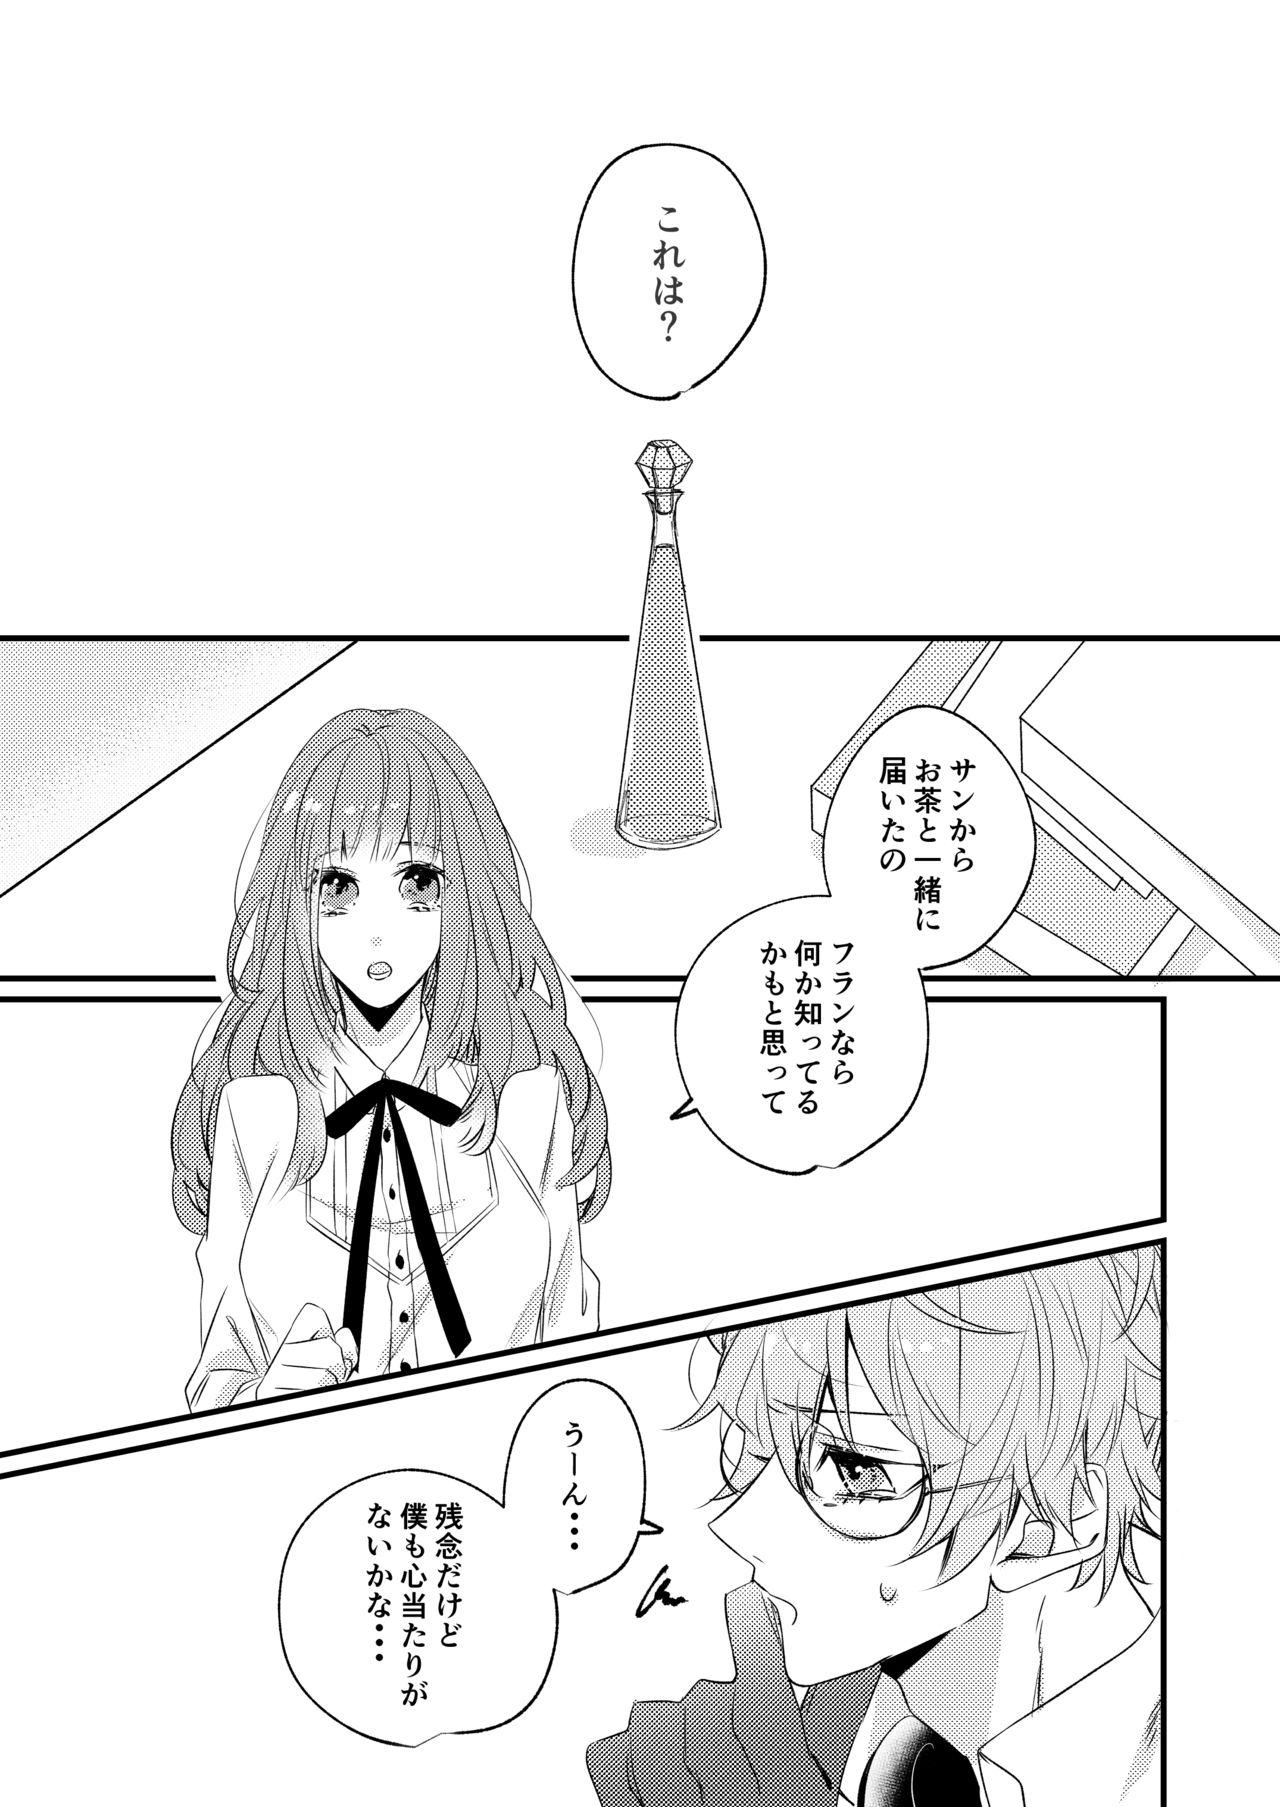 Cuck 熱におぼれる - Code realize sousei no himegimi Doublepenetration - Page 2